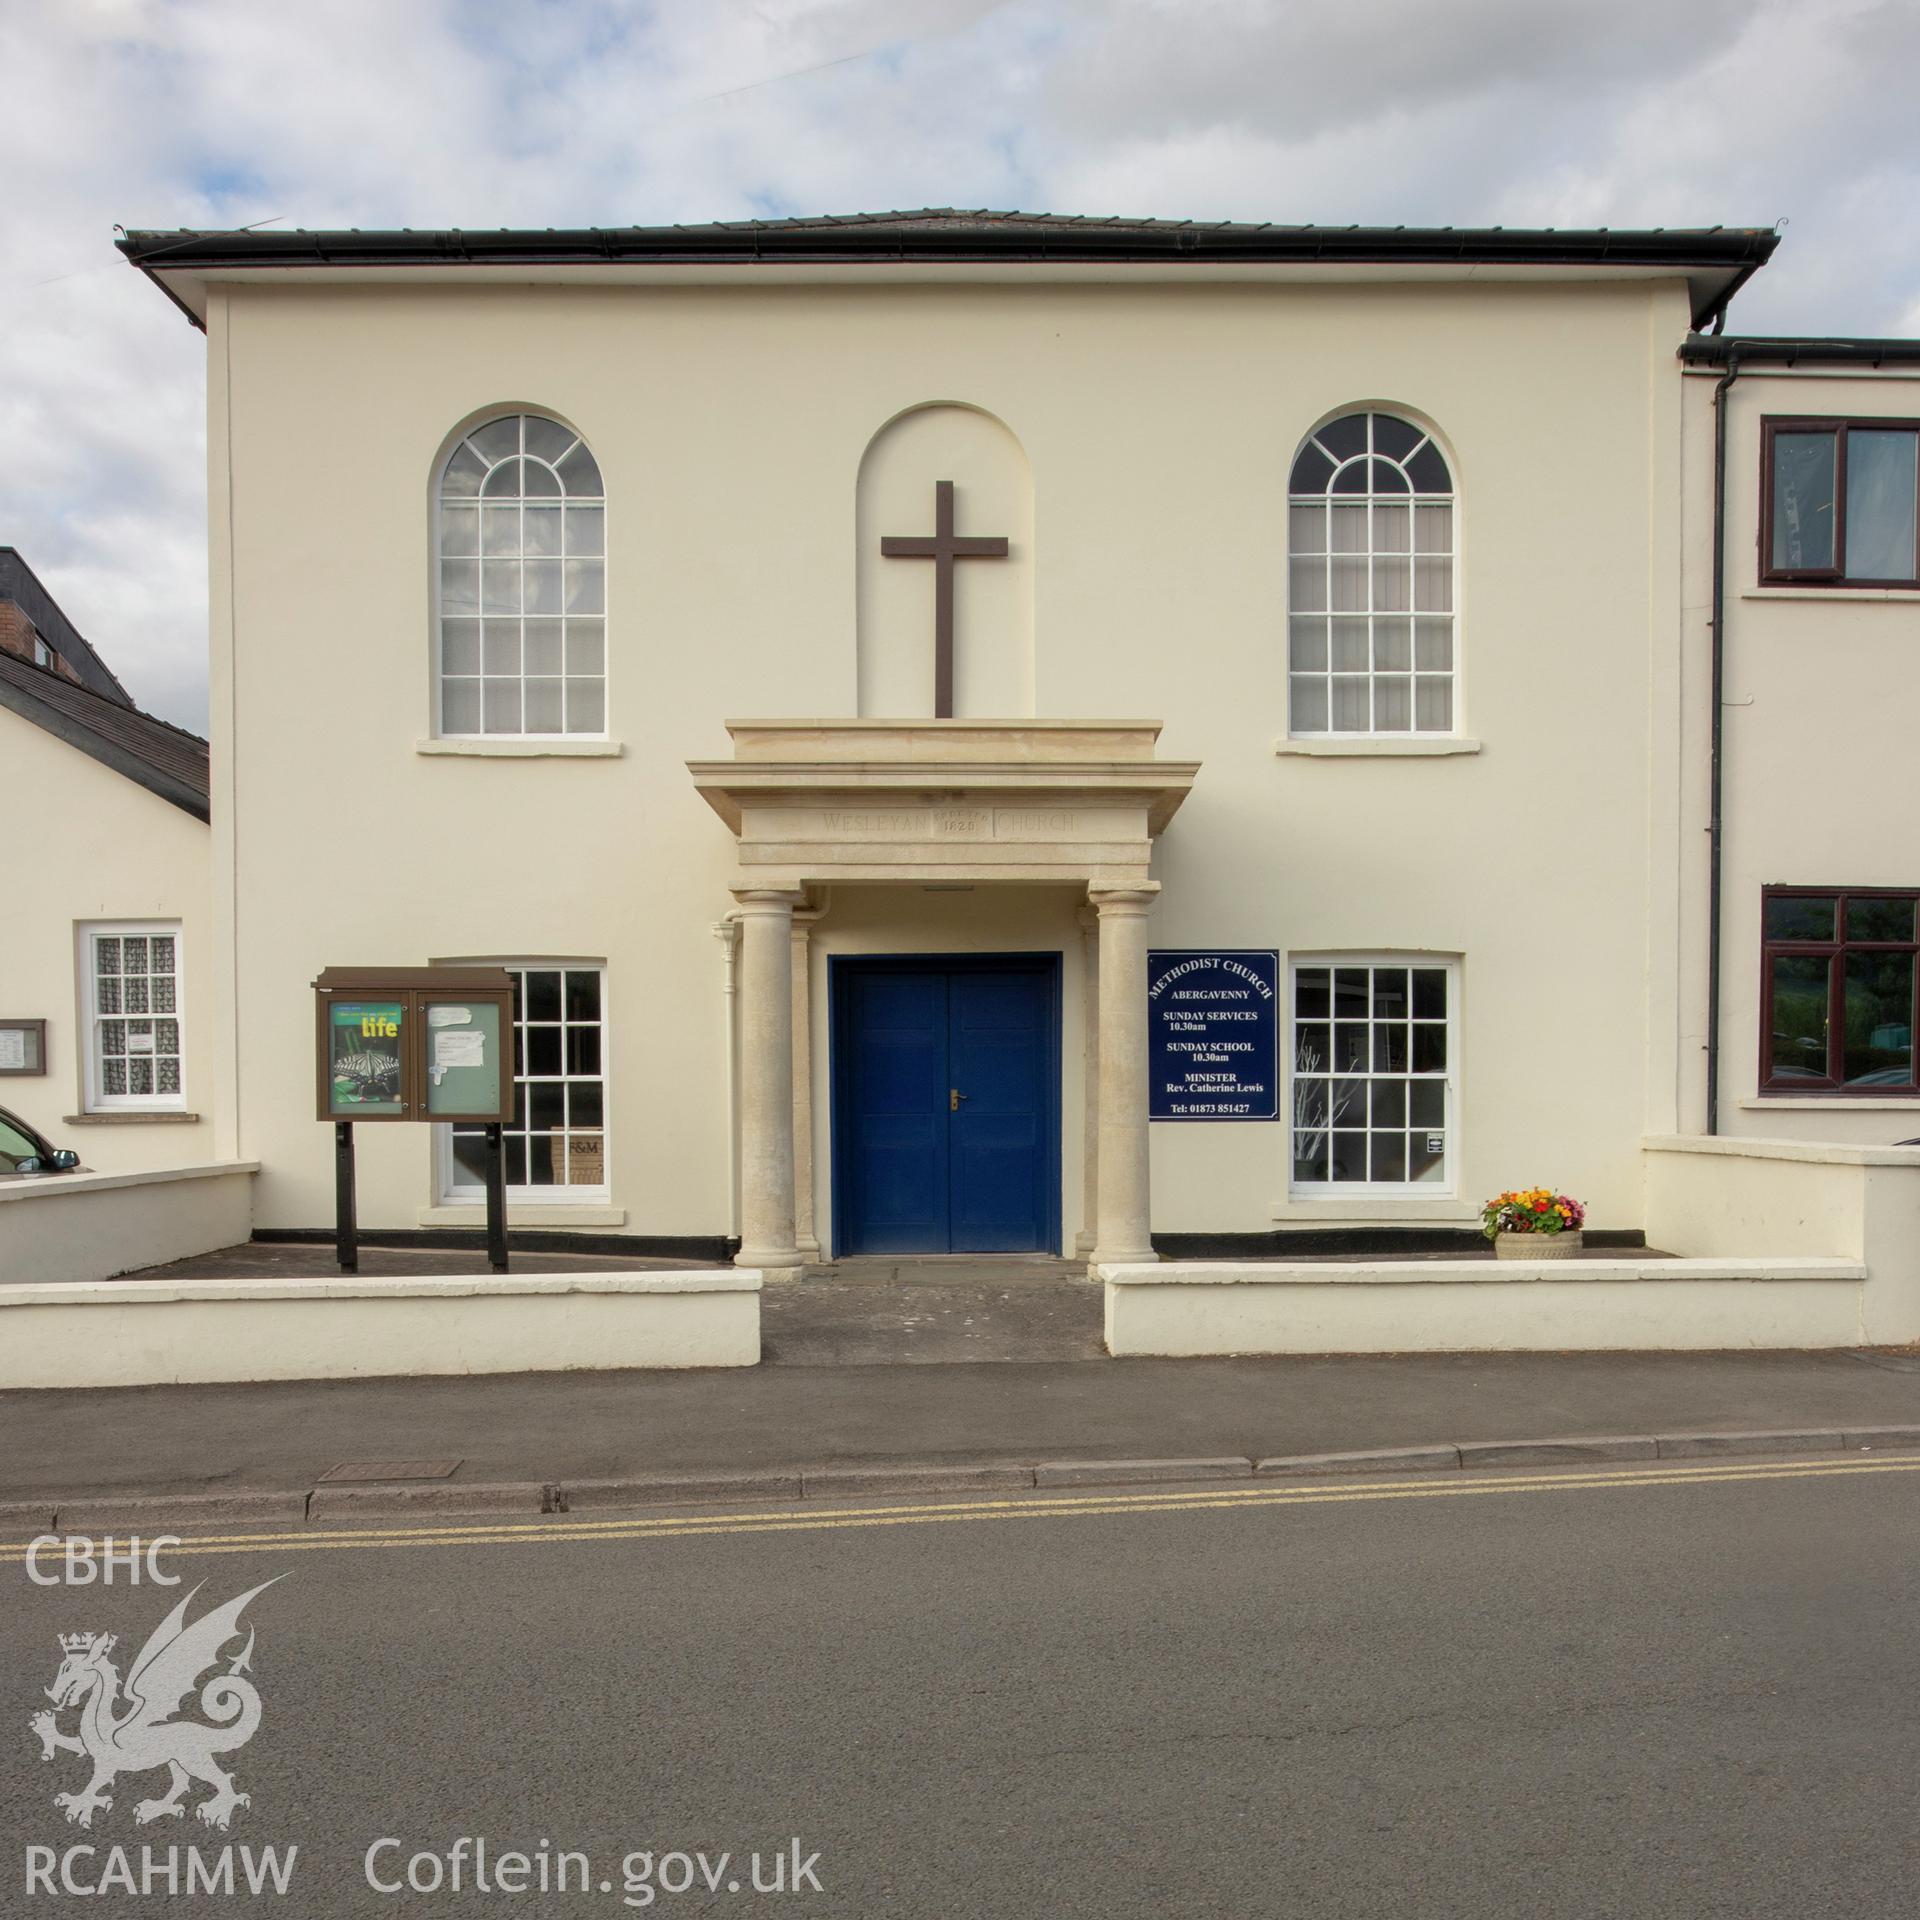 Colour photograph showing front elevation and entrance of Castle Street Wesleyan Methodist Chapel, Abergavenny. Photographed by Richard Barrett on 17th July 2018.